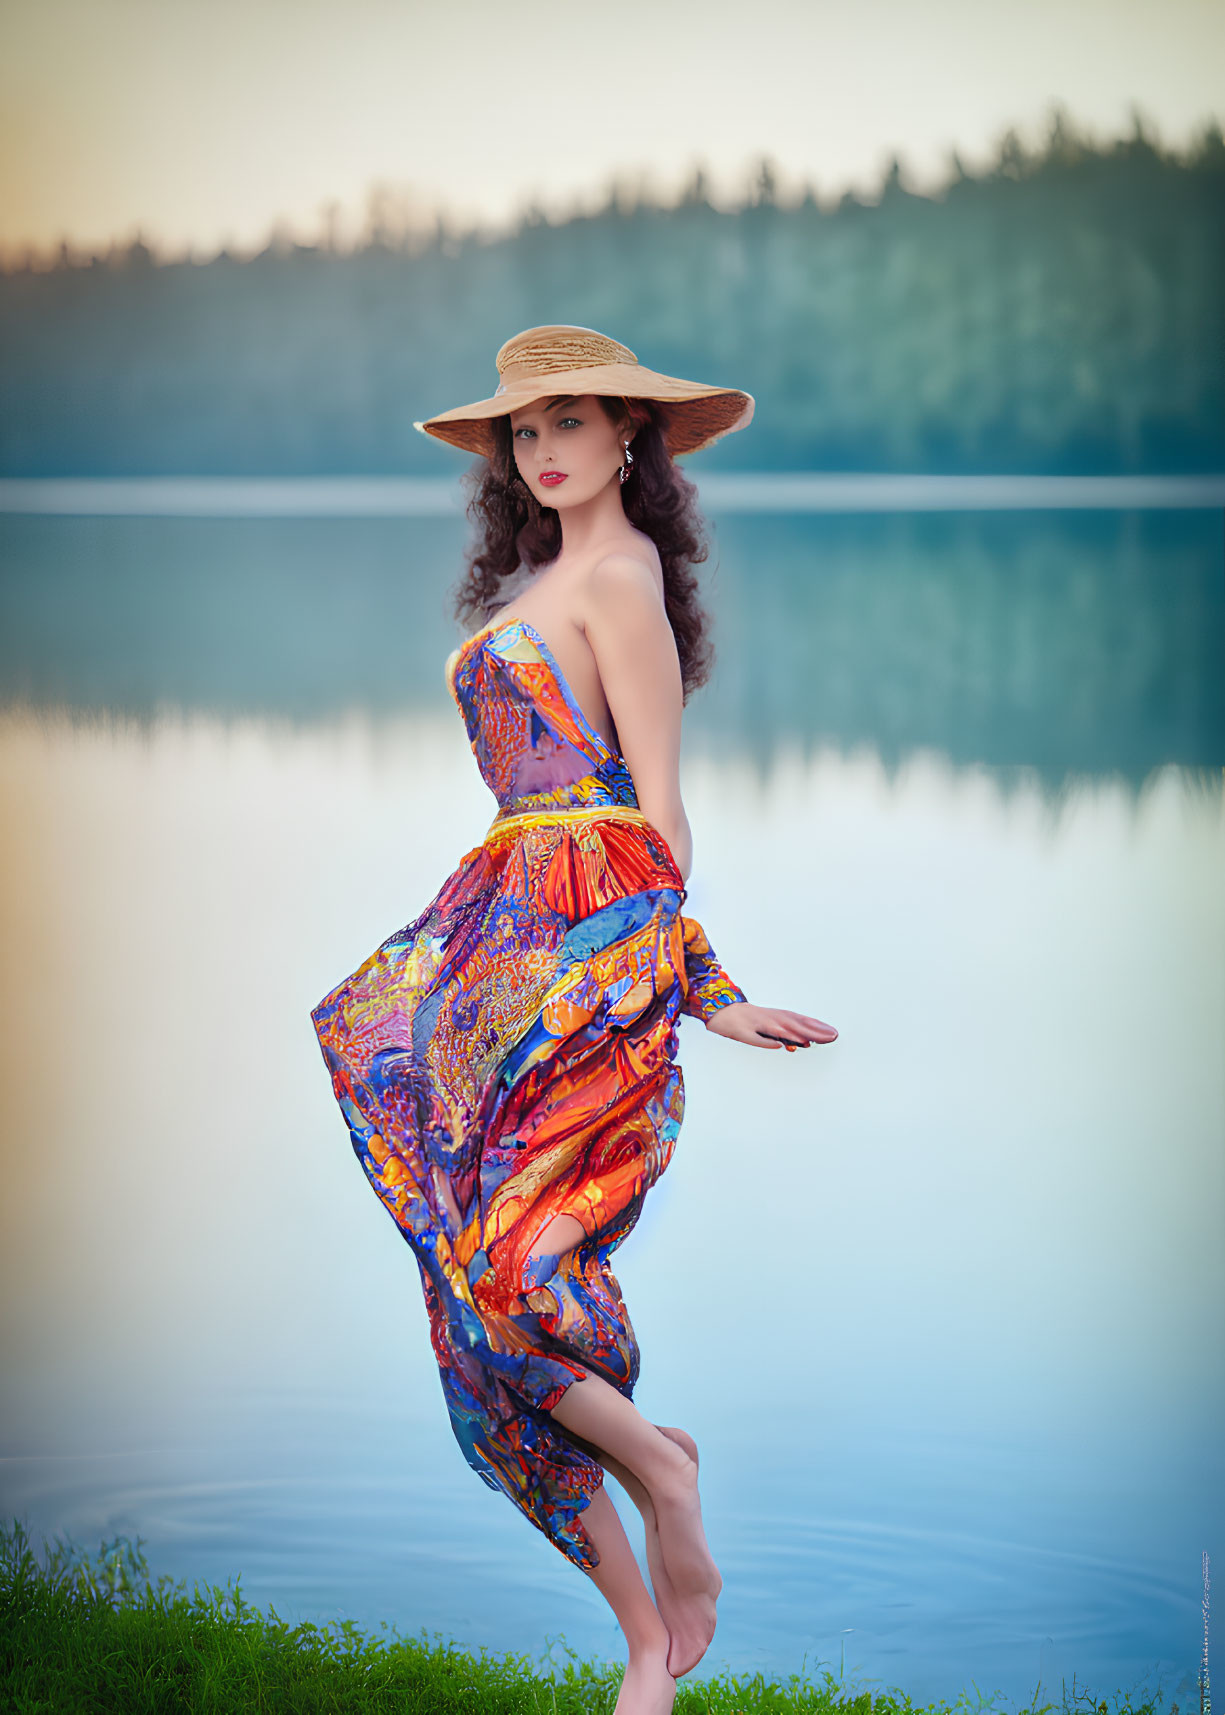 Woman in colorful dress and wide-brimmed hat by calm lake and serene forest